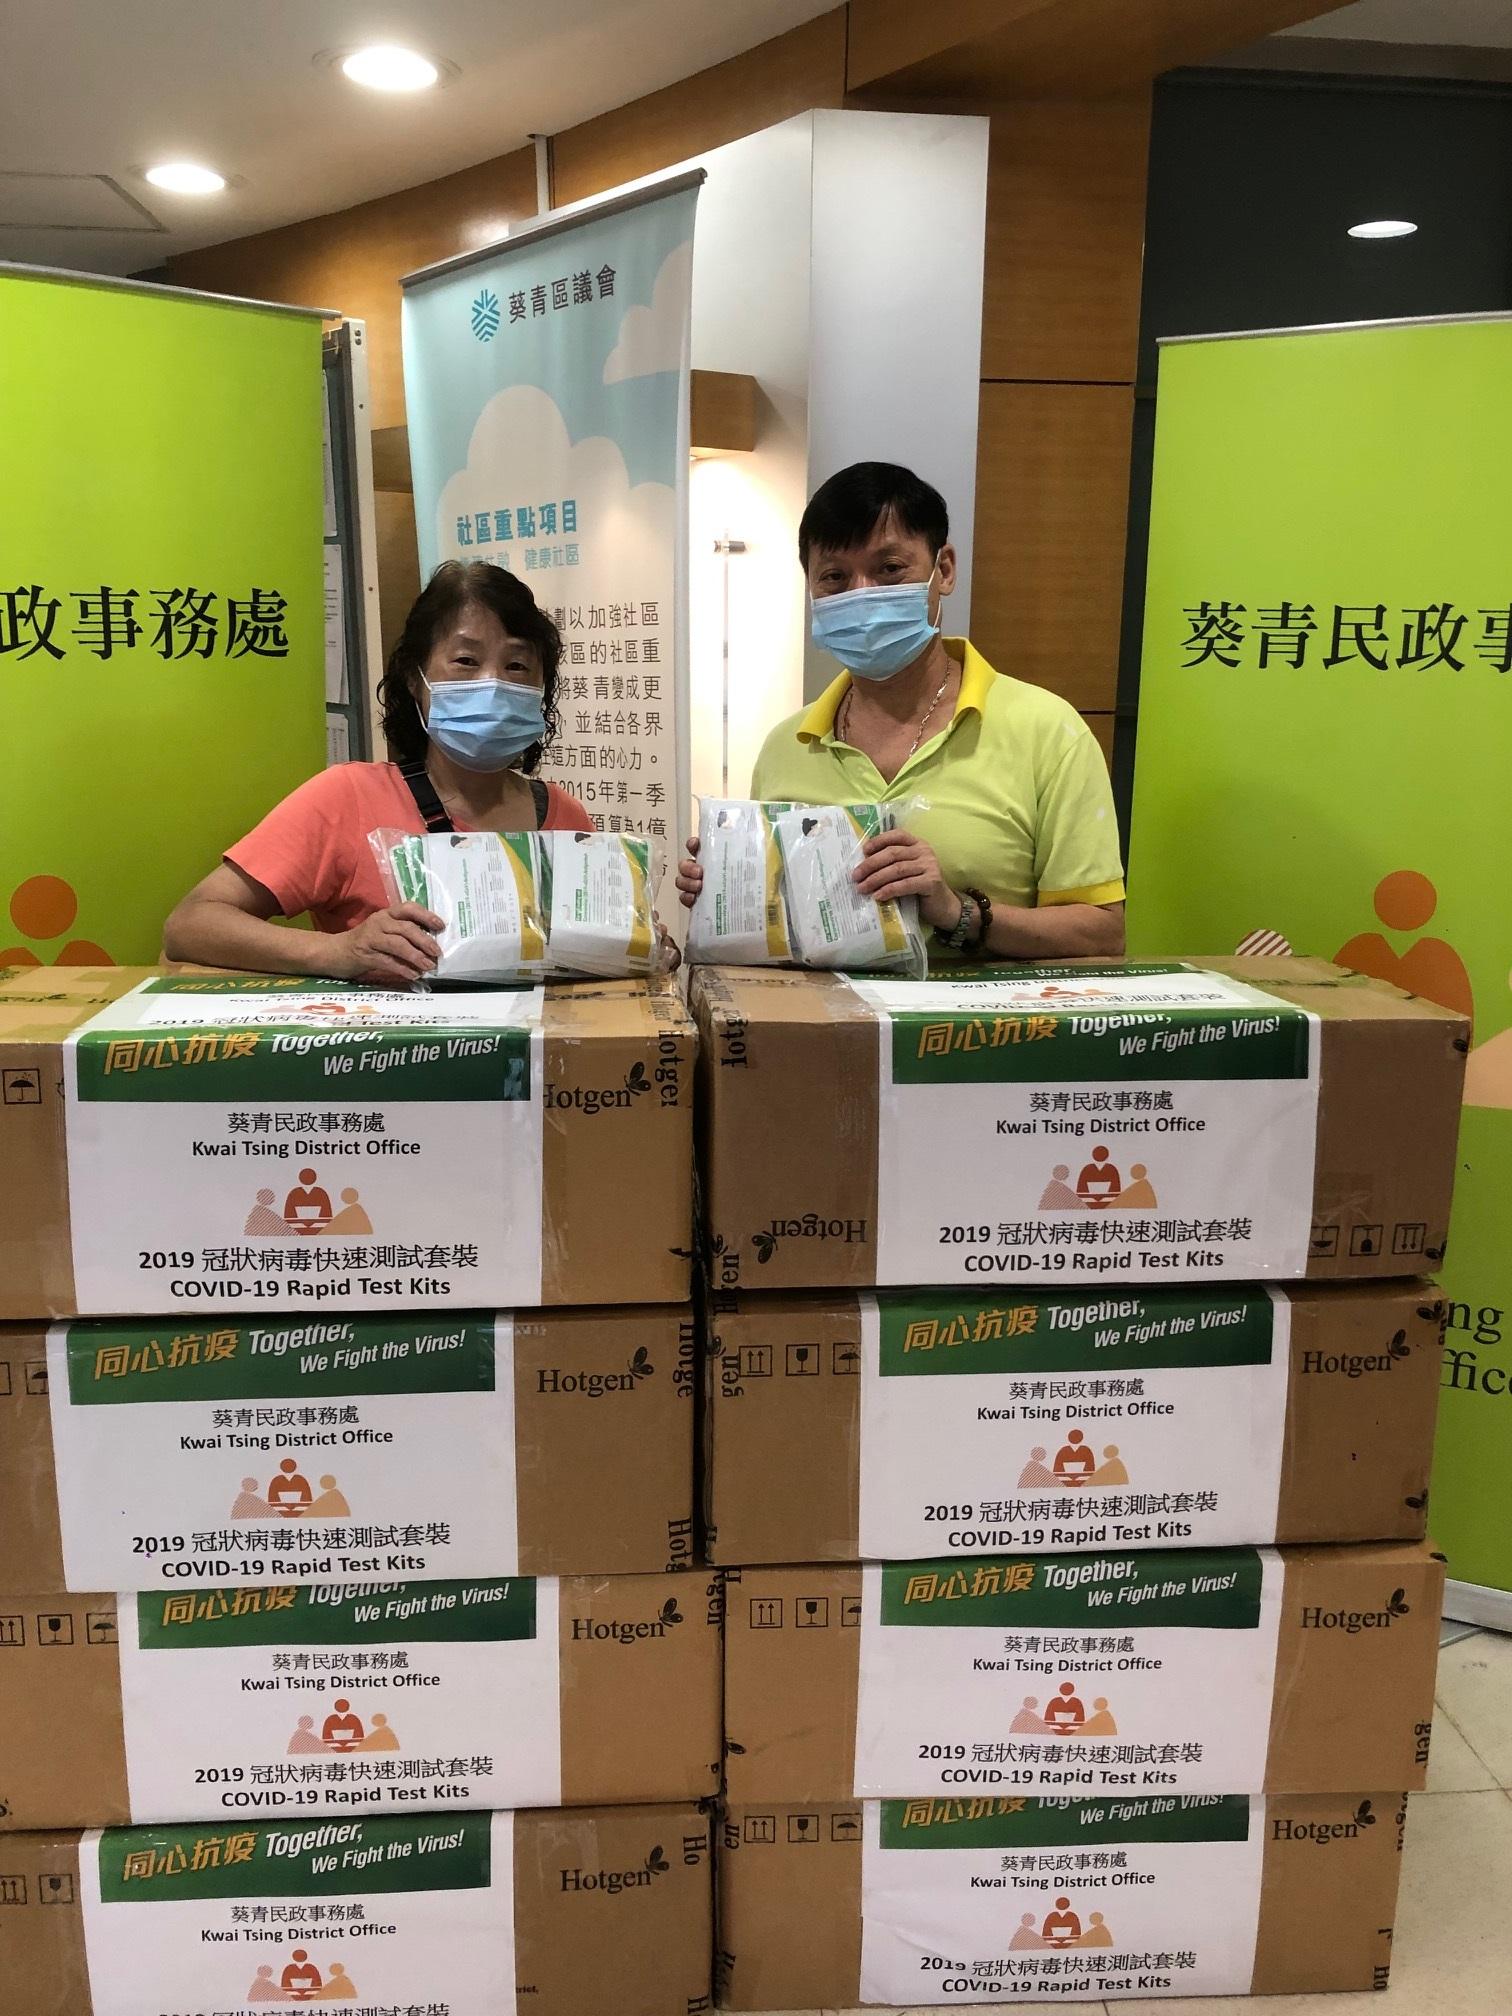 The Kwai Tsing District Office today (May 13) distributed COVID-19 rapid test kits to households, cleansing workers and property management staff living and working in Sing Shing Building for voluntary testing through the property management company and the owners' corporation.